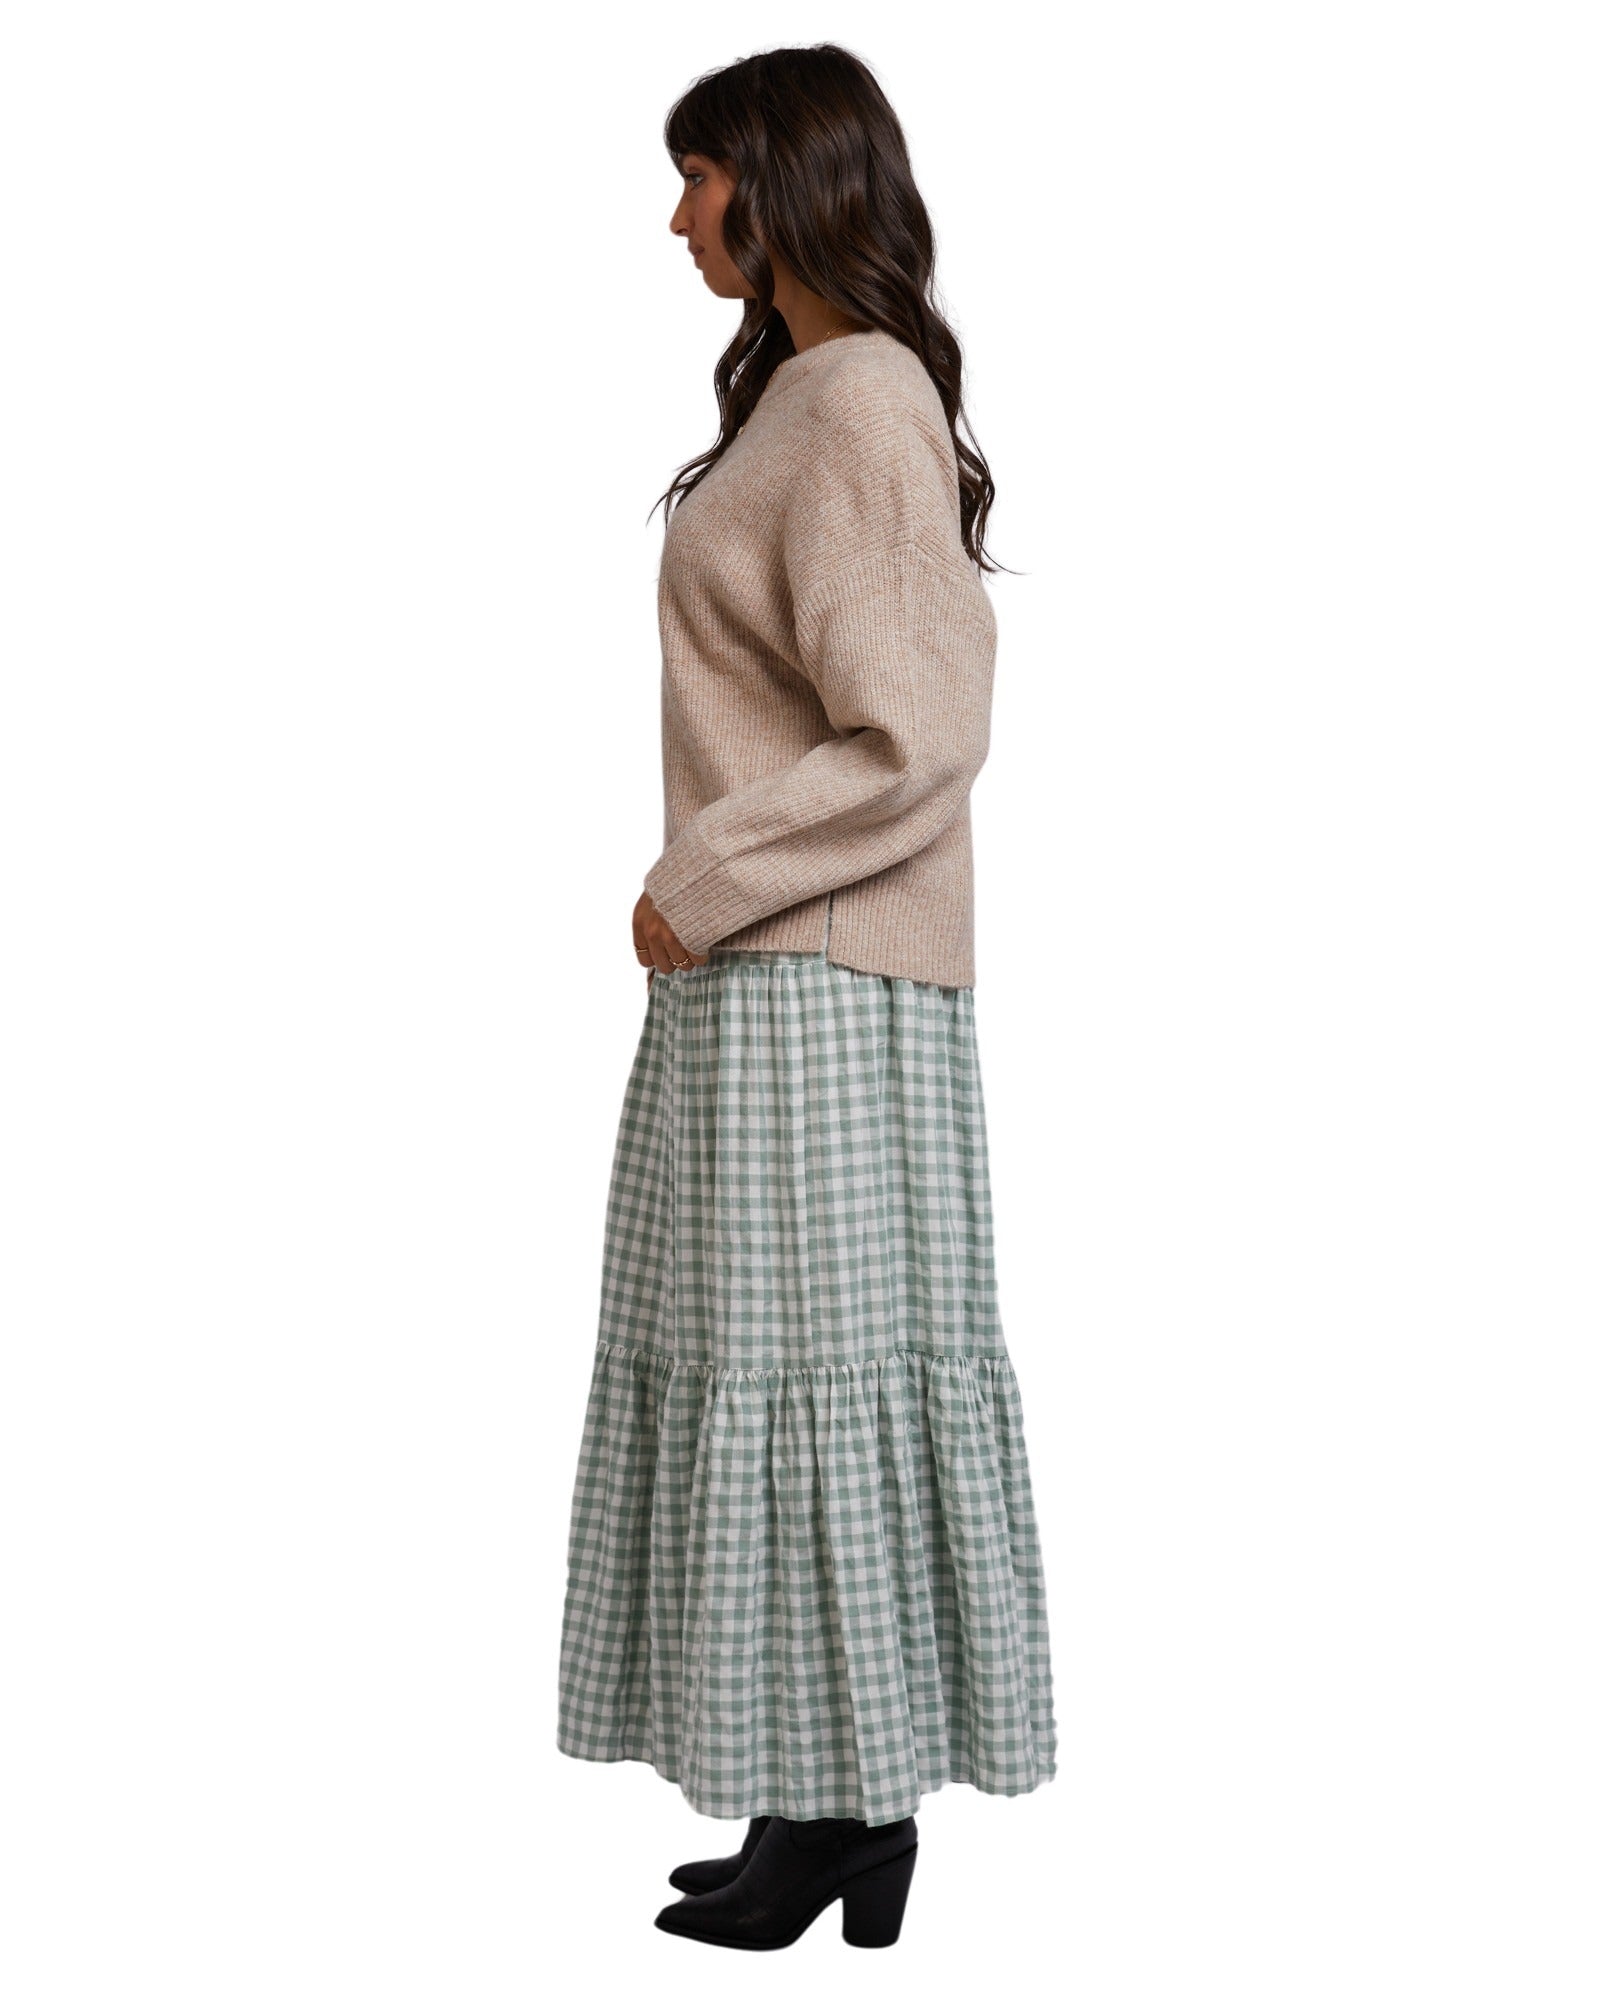 All About Eve - Kendal Knit - Oat